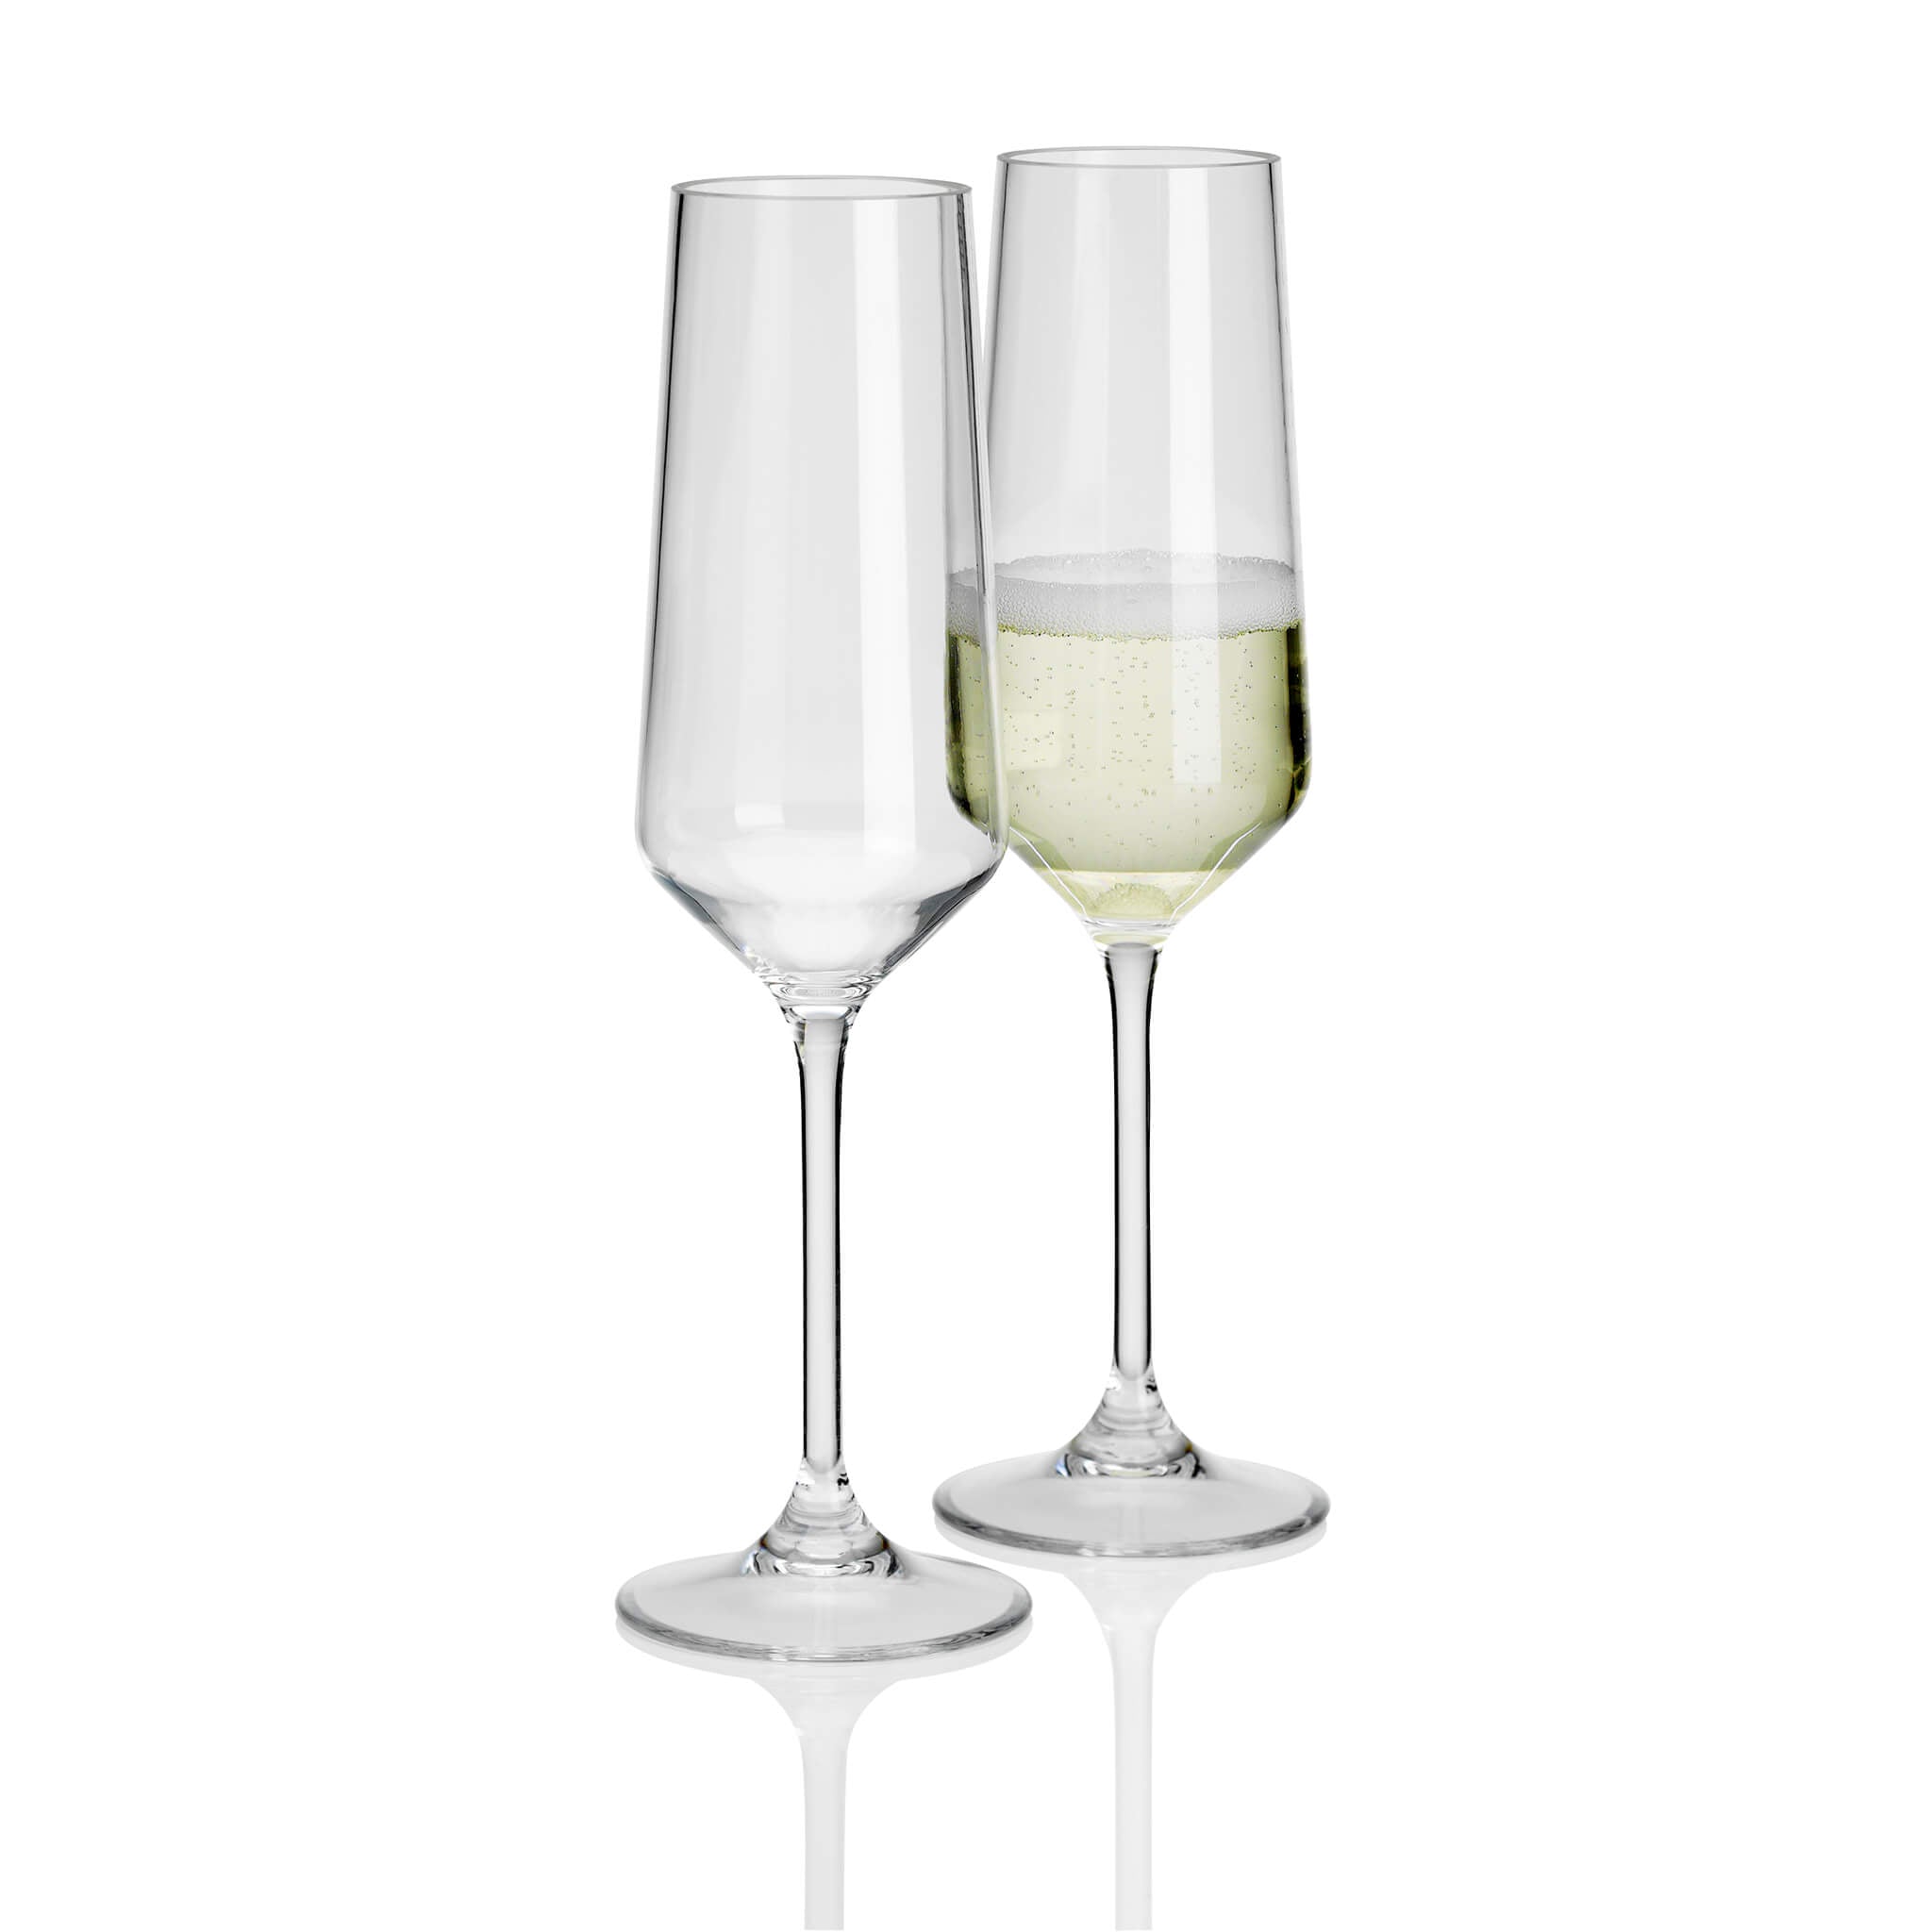 Savoy Champagne Flutes (Set of 2) - Alfresco Dining Company